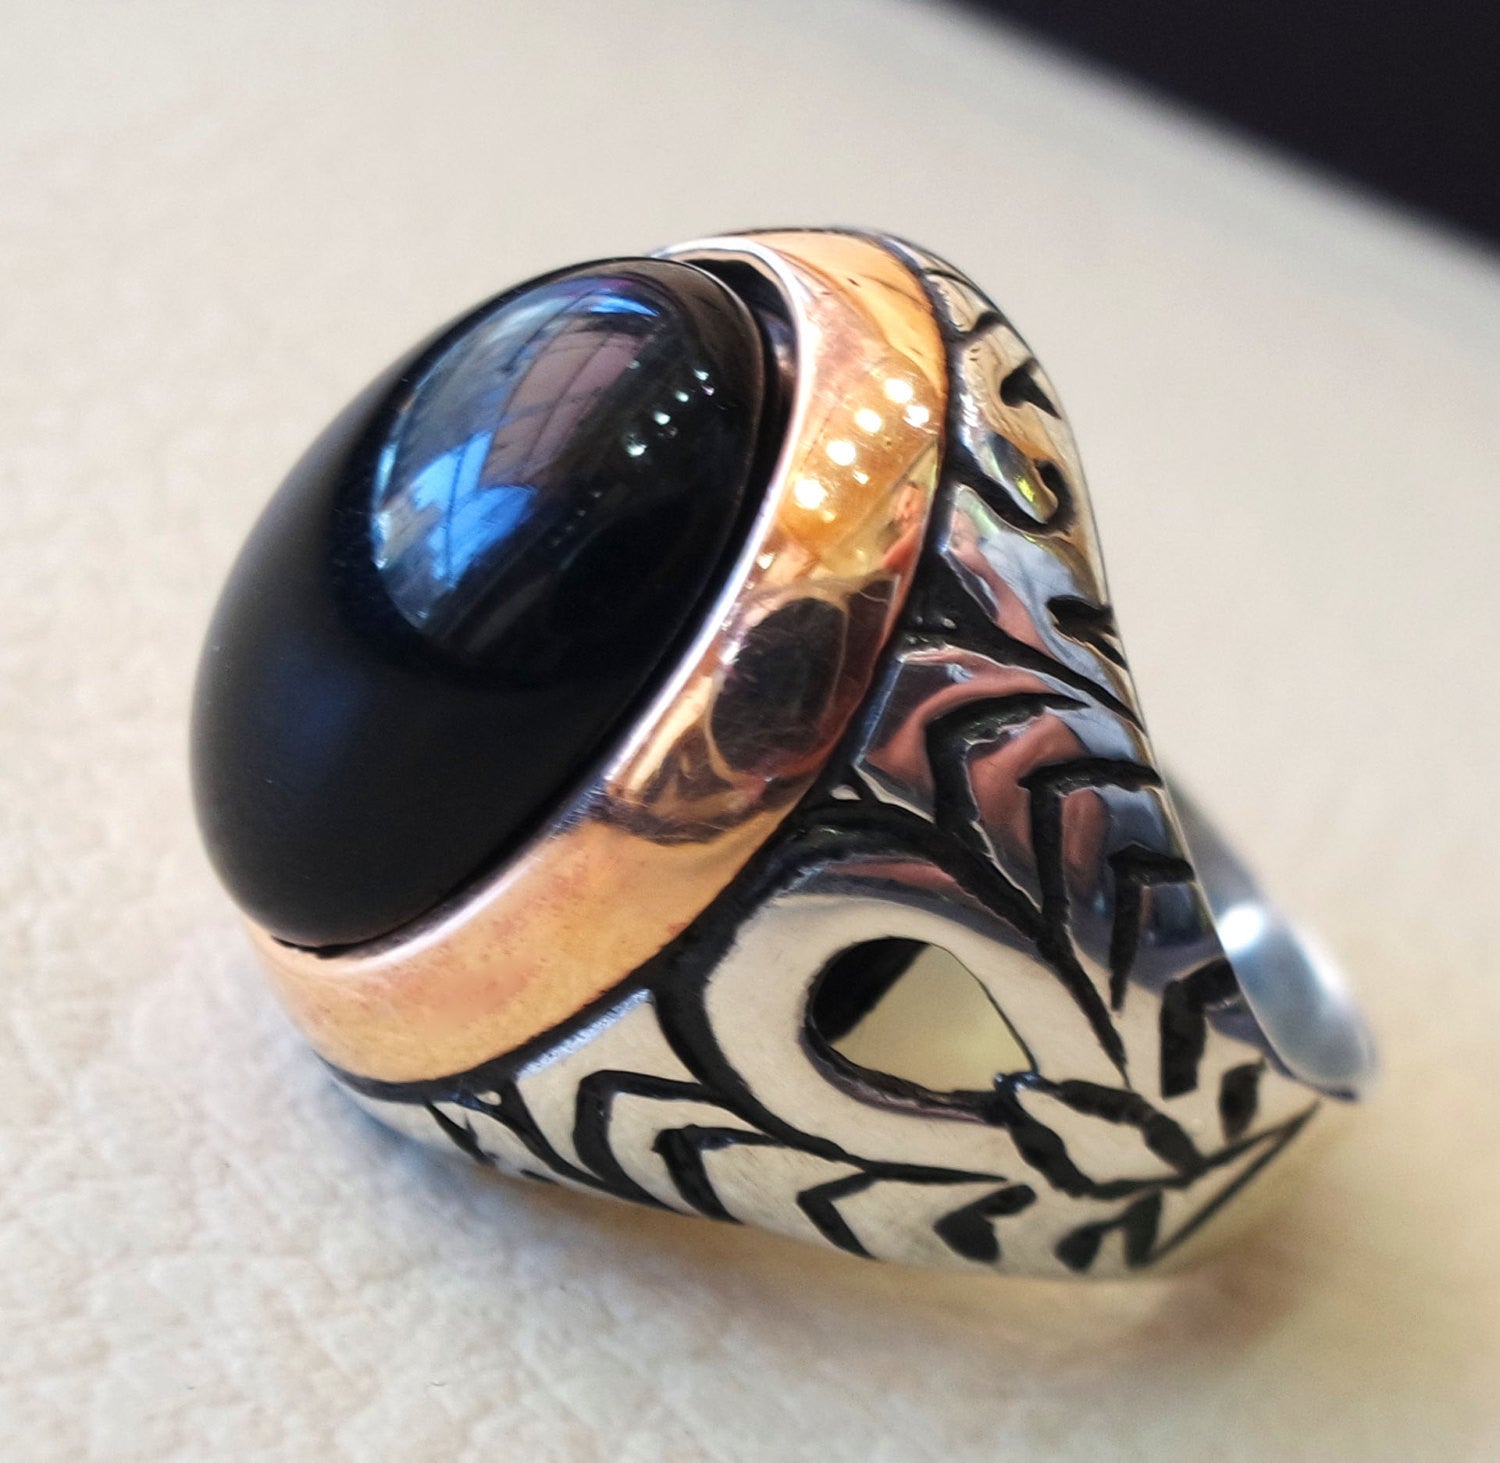 obsidian black aqeeq men ring natural stone sterling silver 925 vintage arabic turkish style all sizes on bronze fast shipping